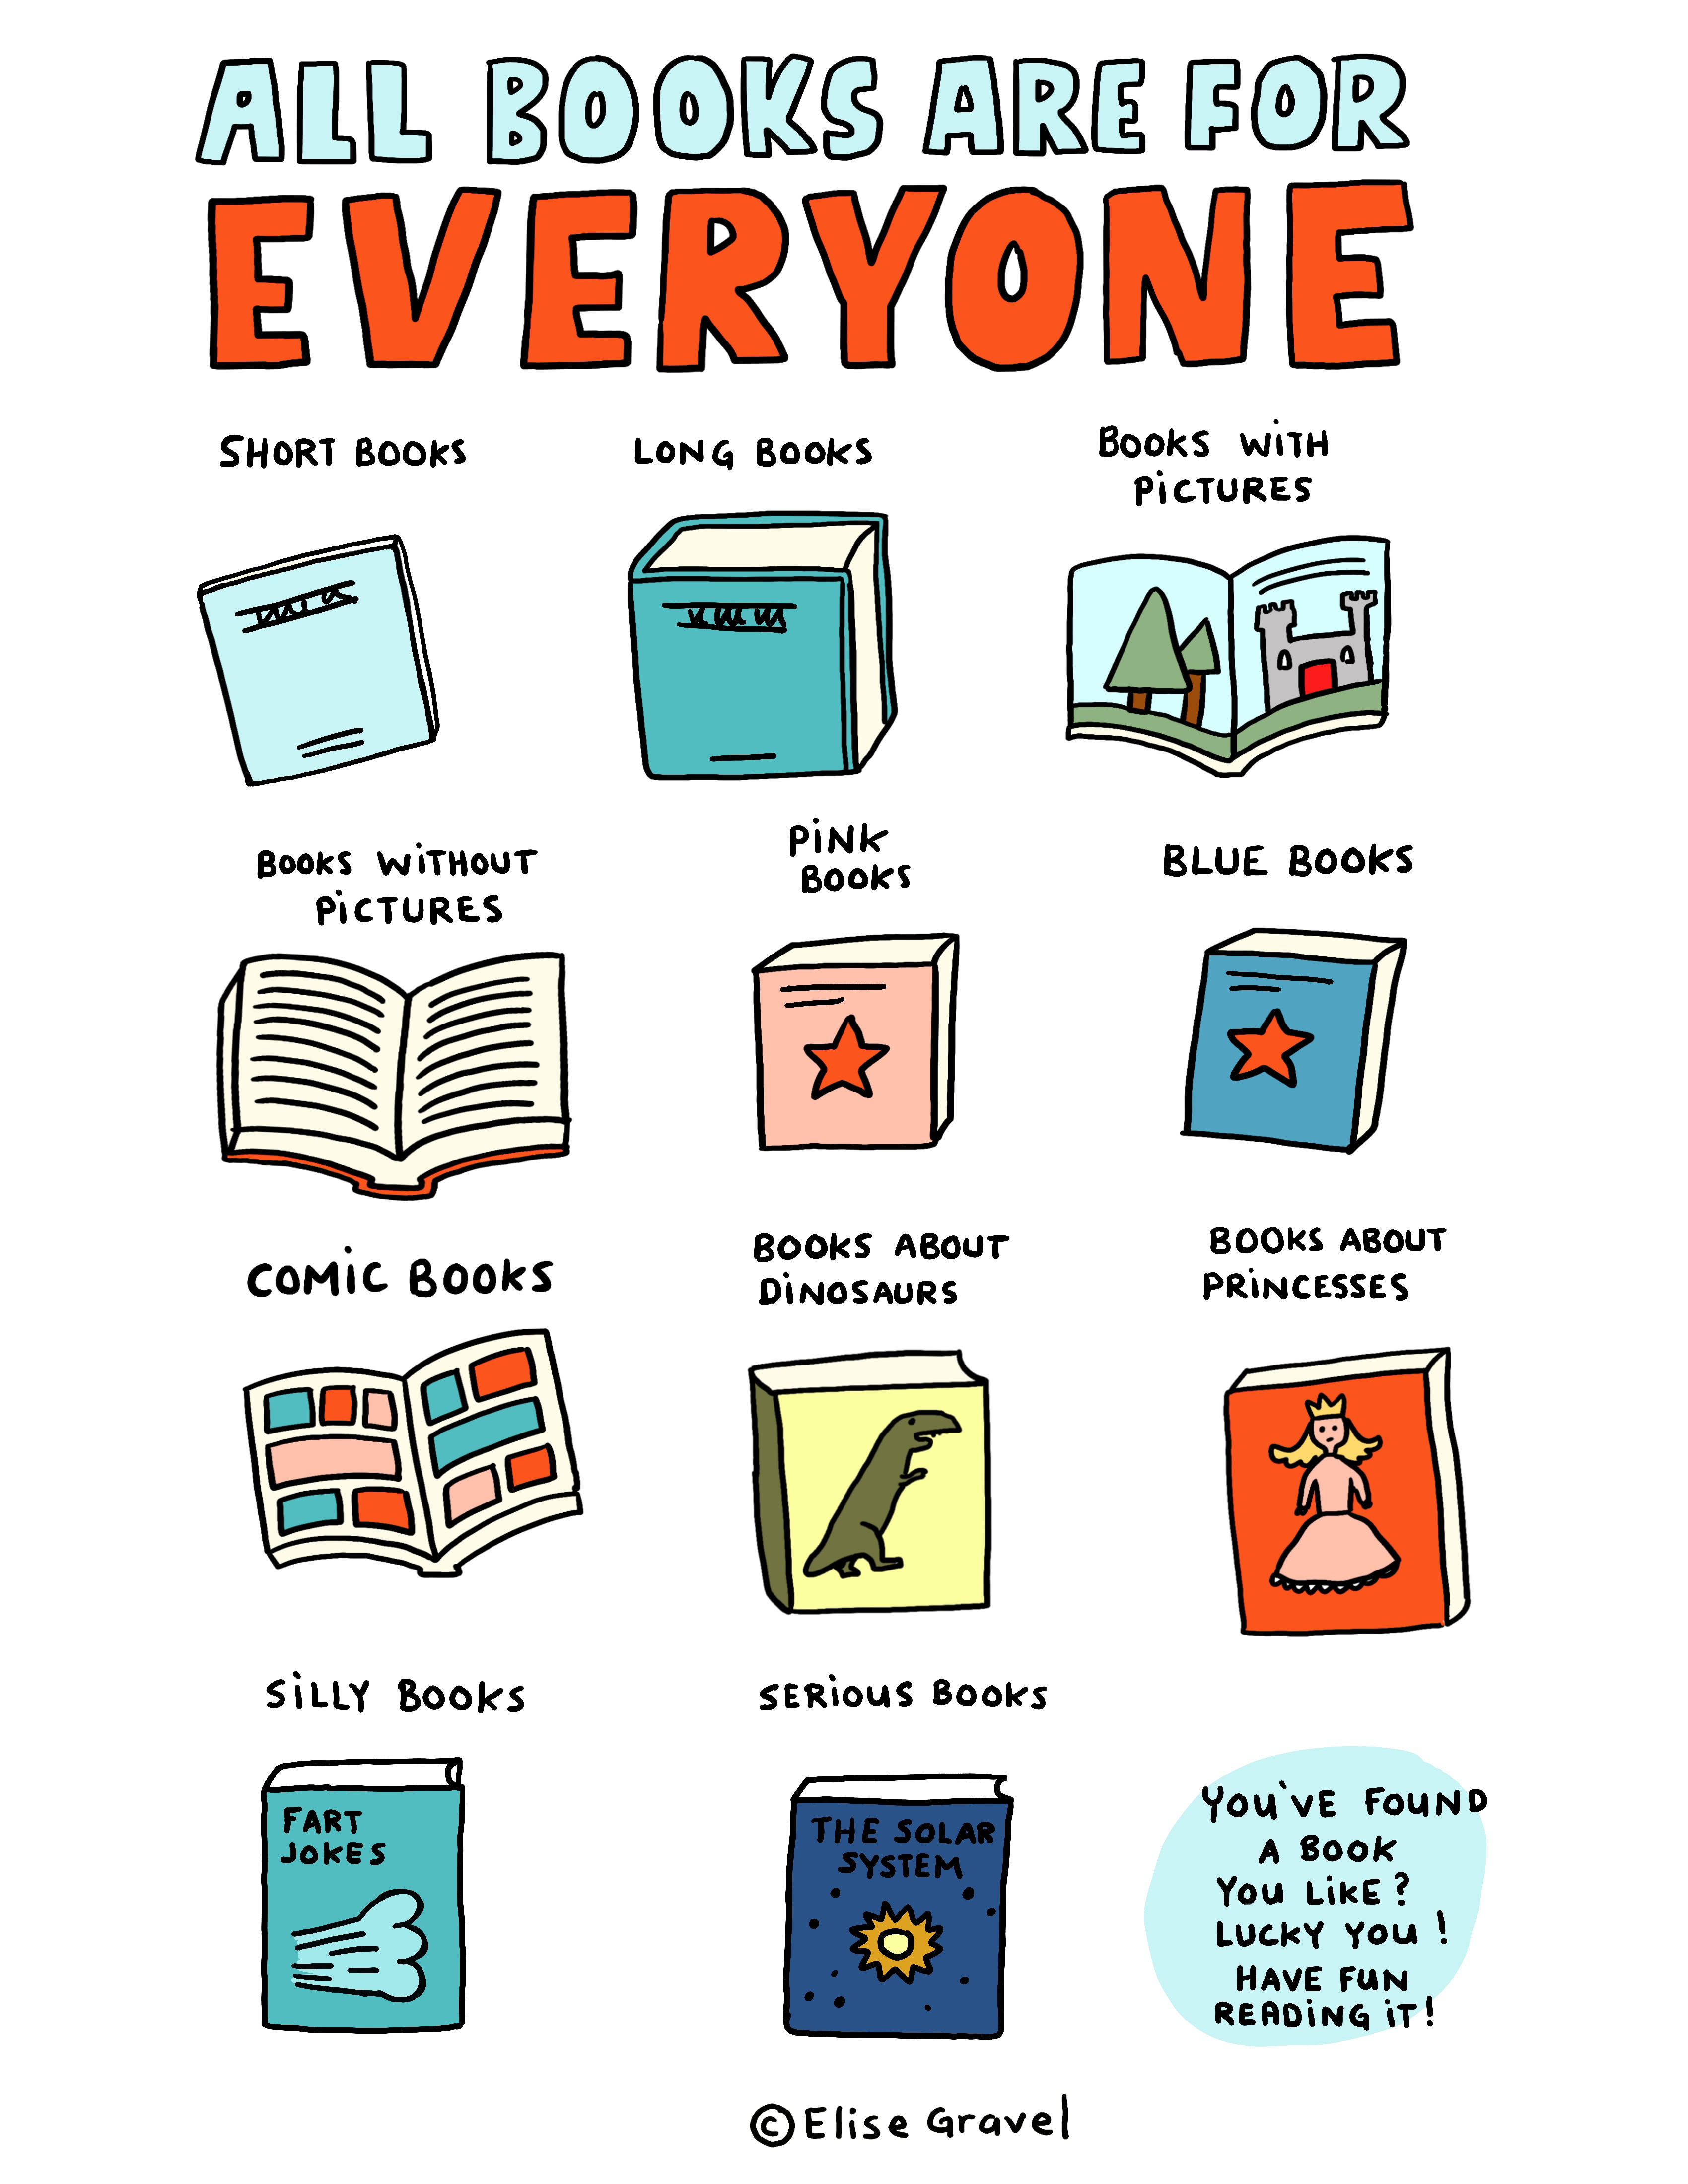 All books are for everyone